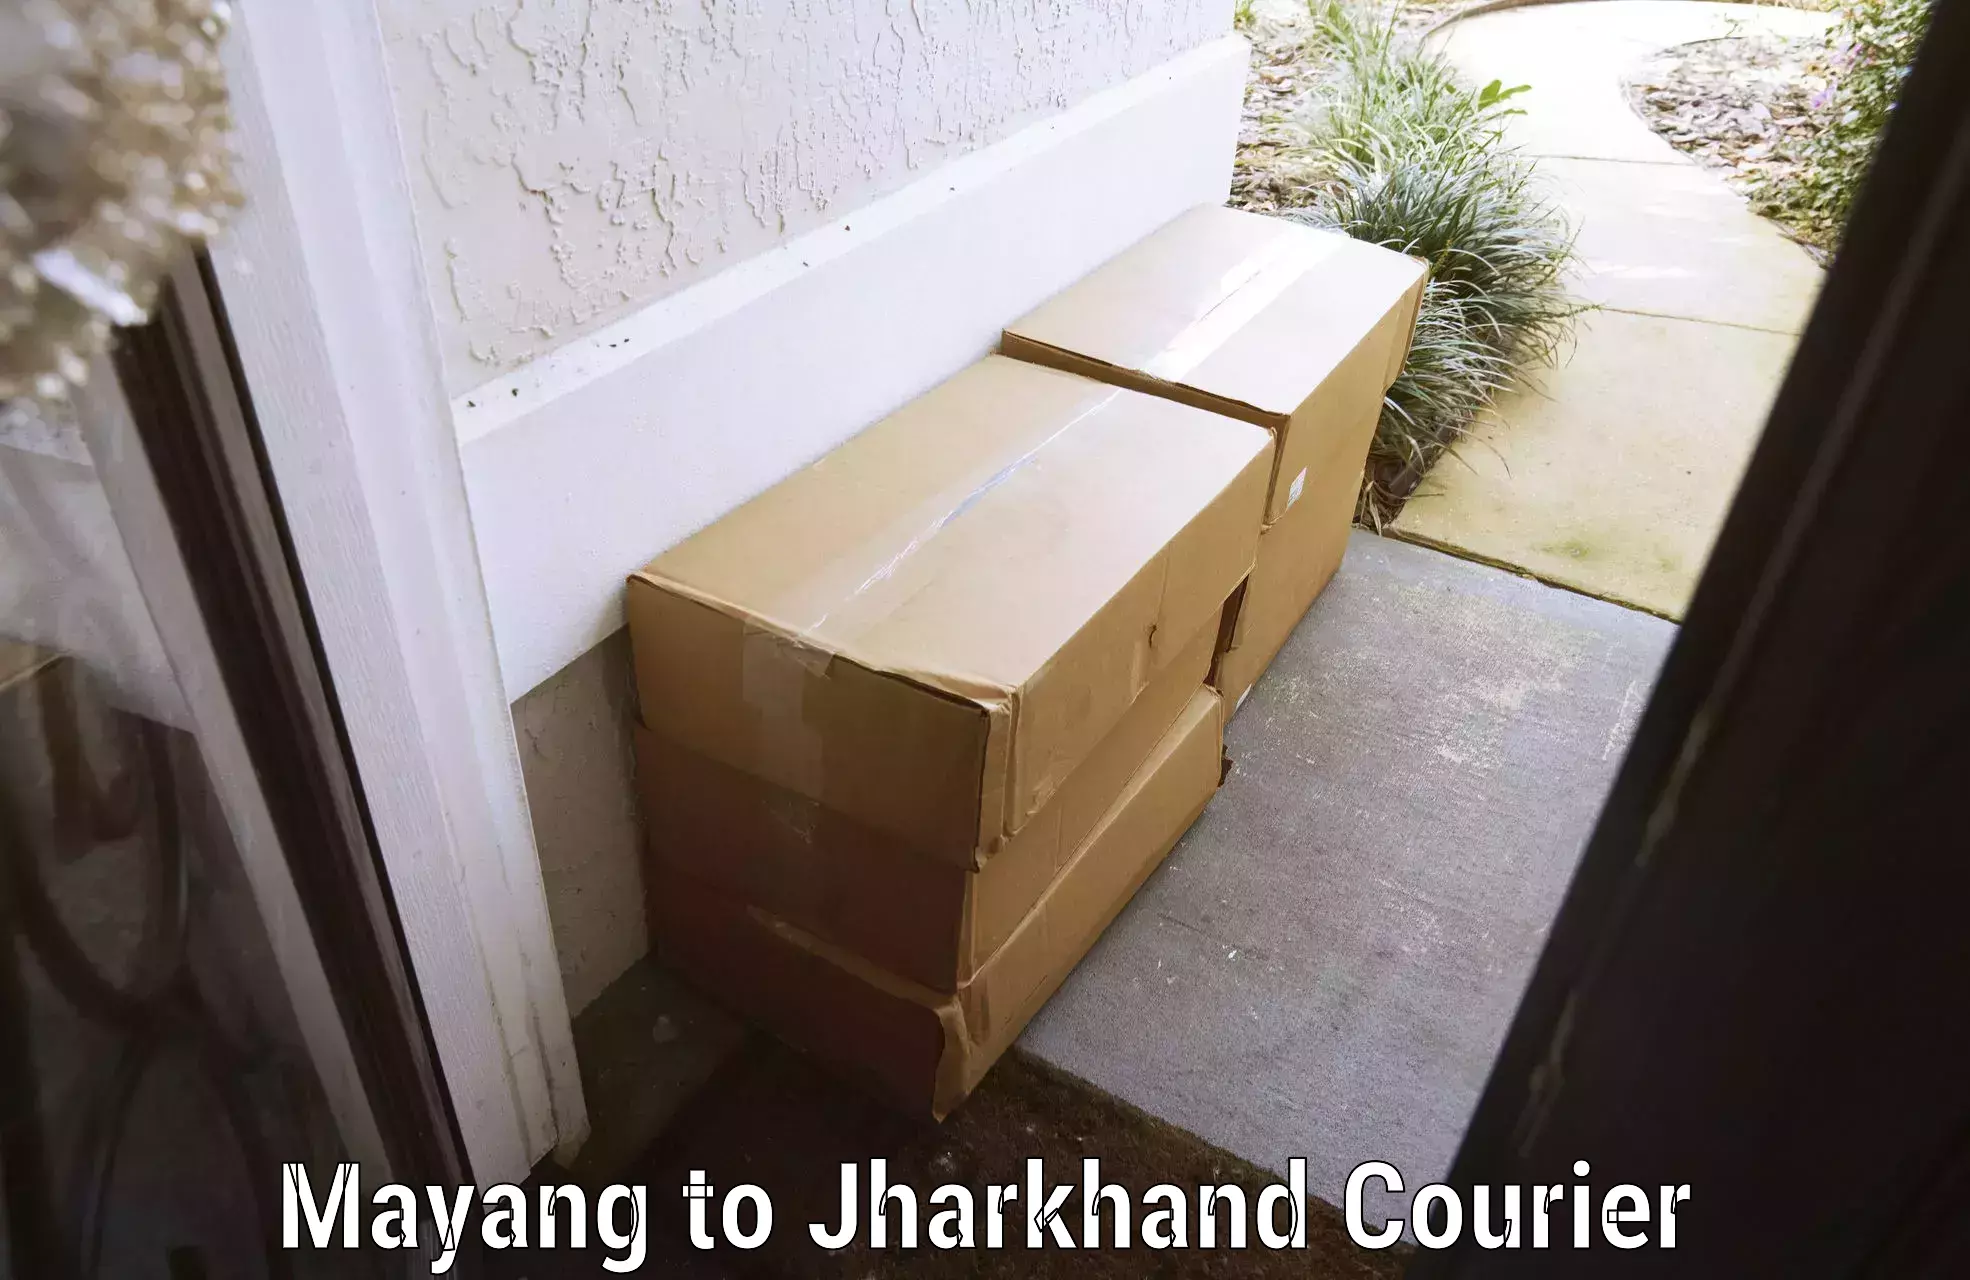 Luggage transport consultancy Mayang to Jharkhand